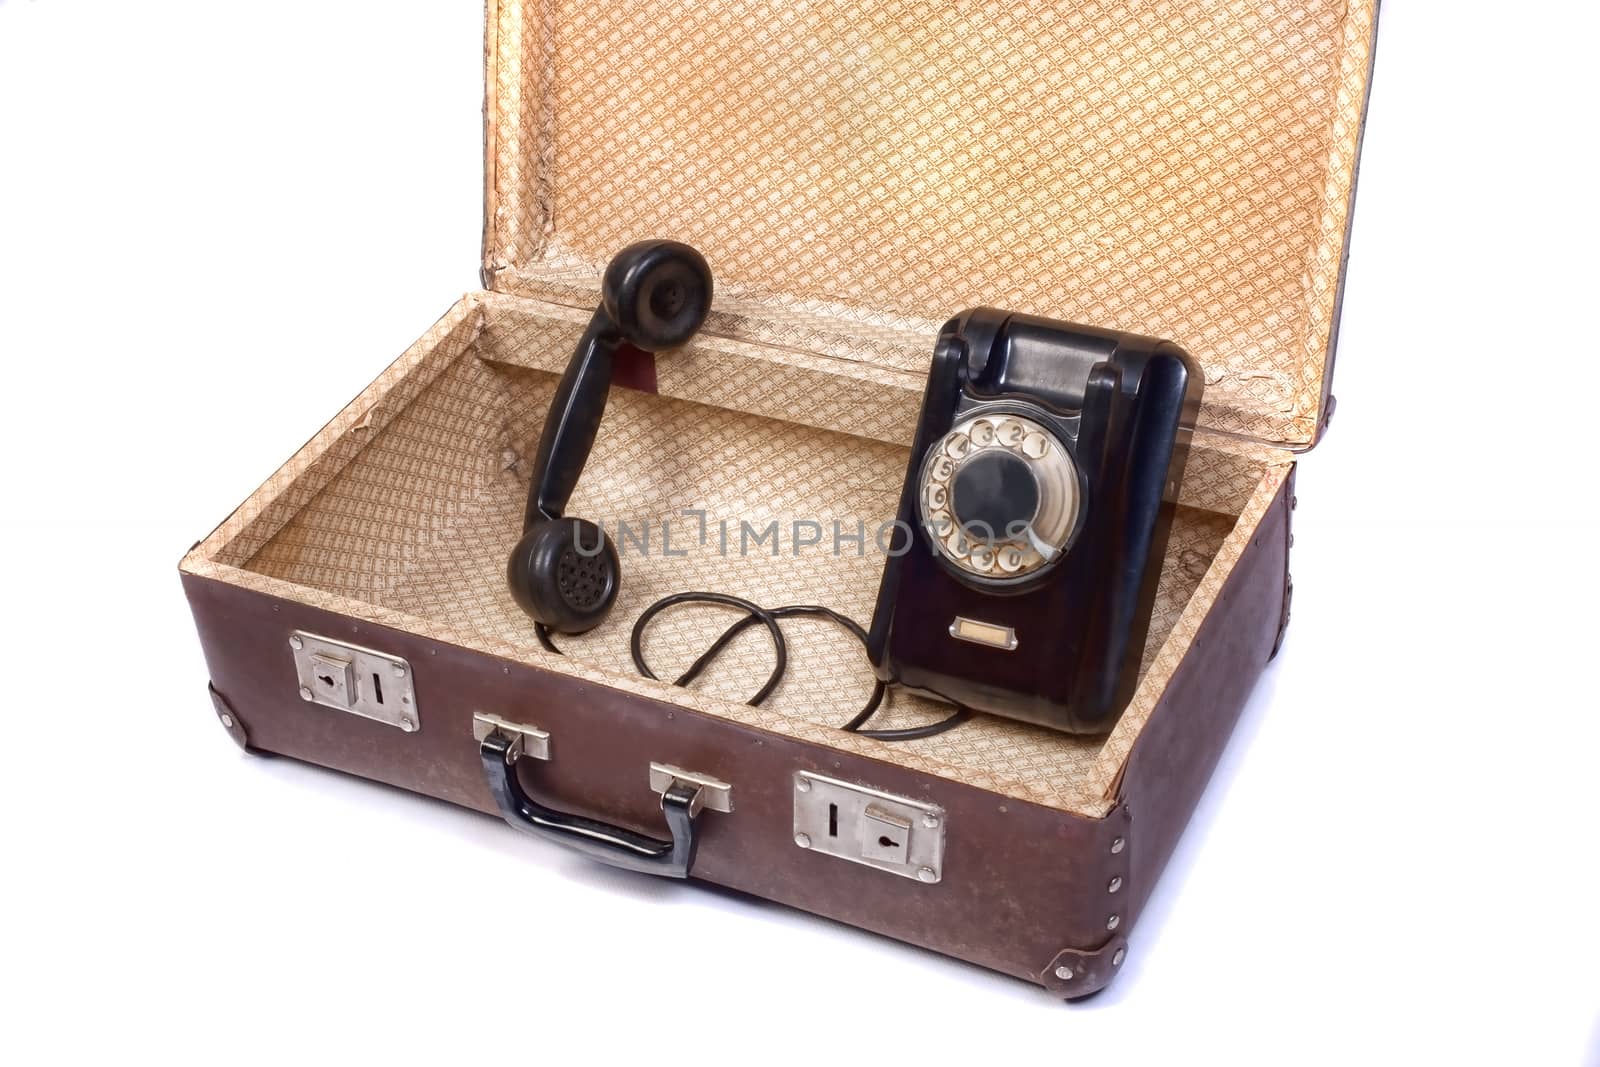 Old rotational phone in old suitcase